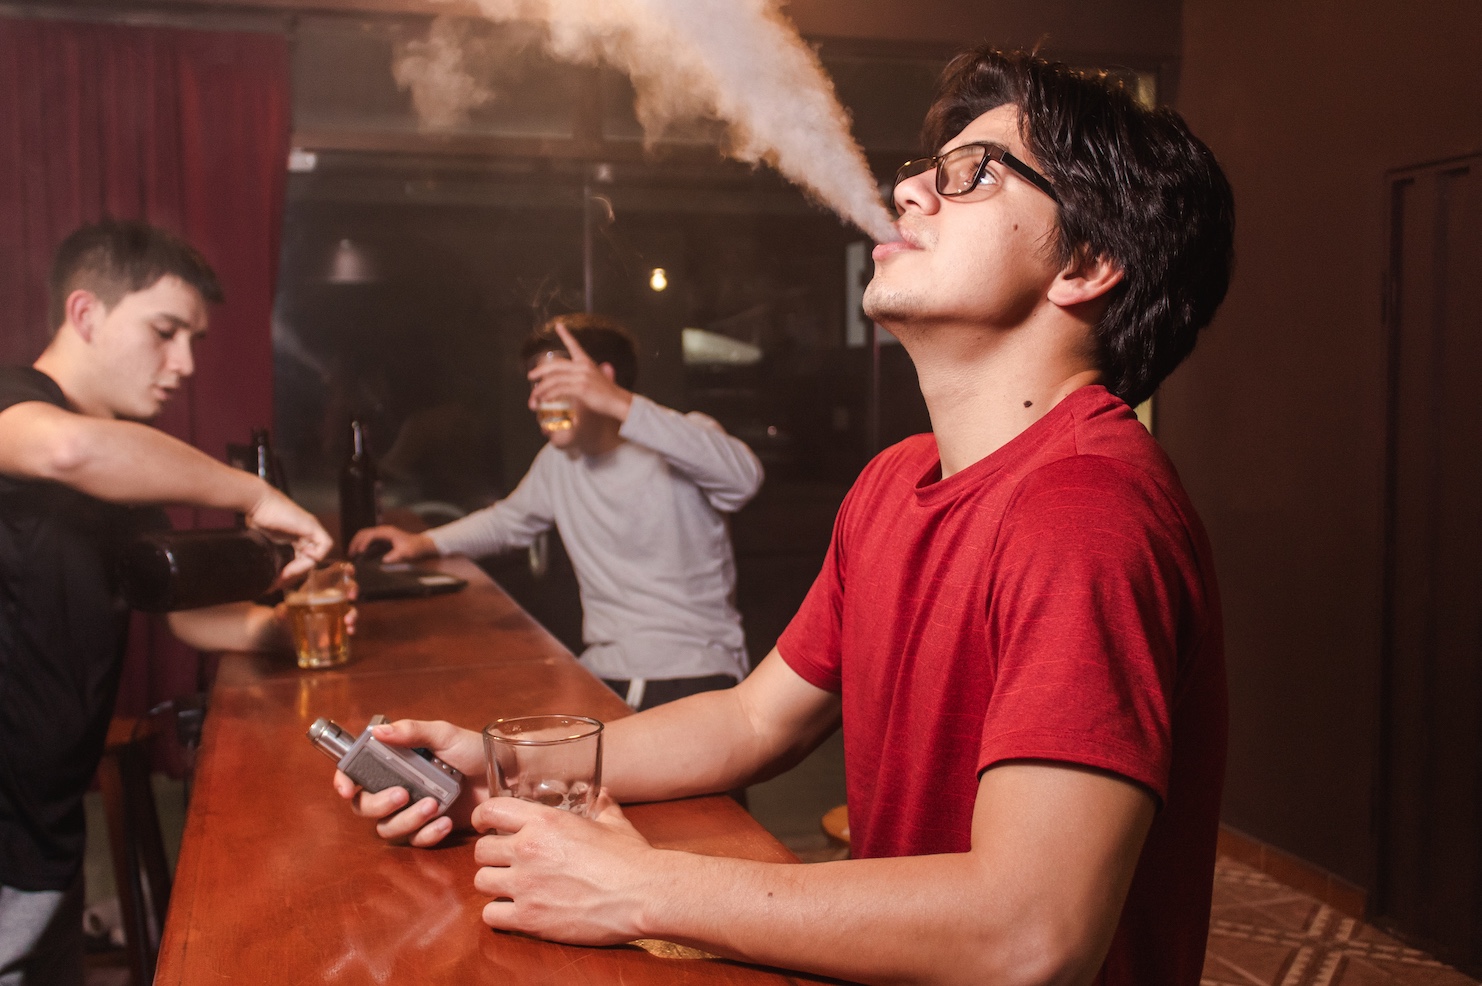 Can you vape in pubs in the uk?